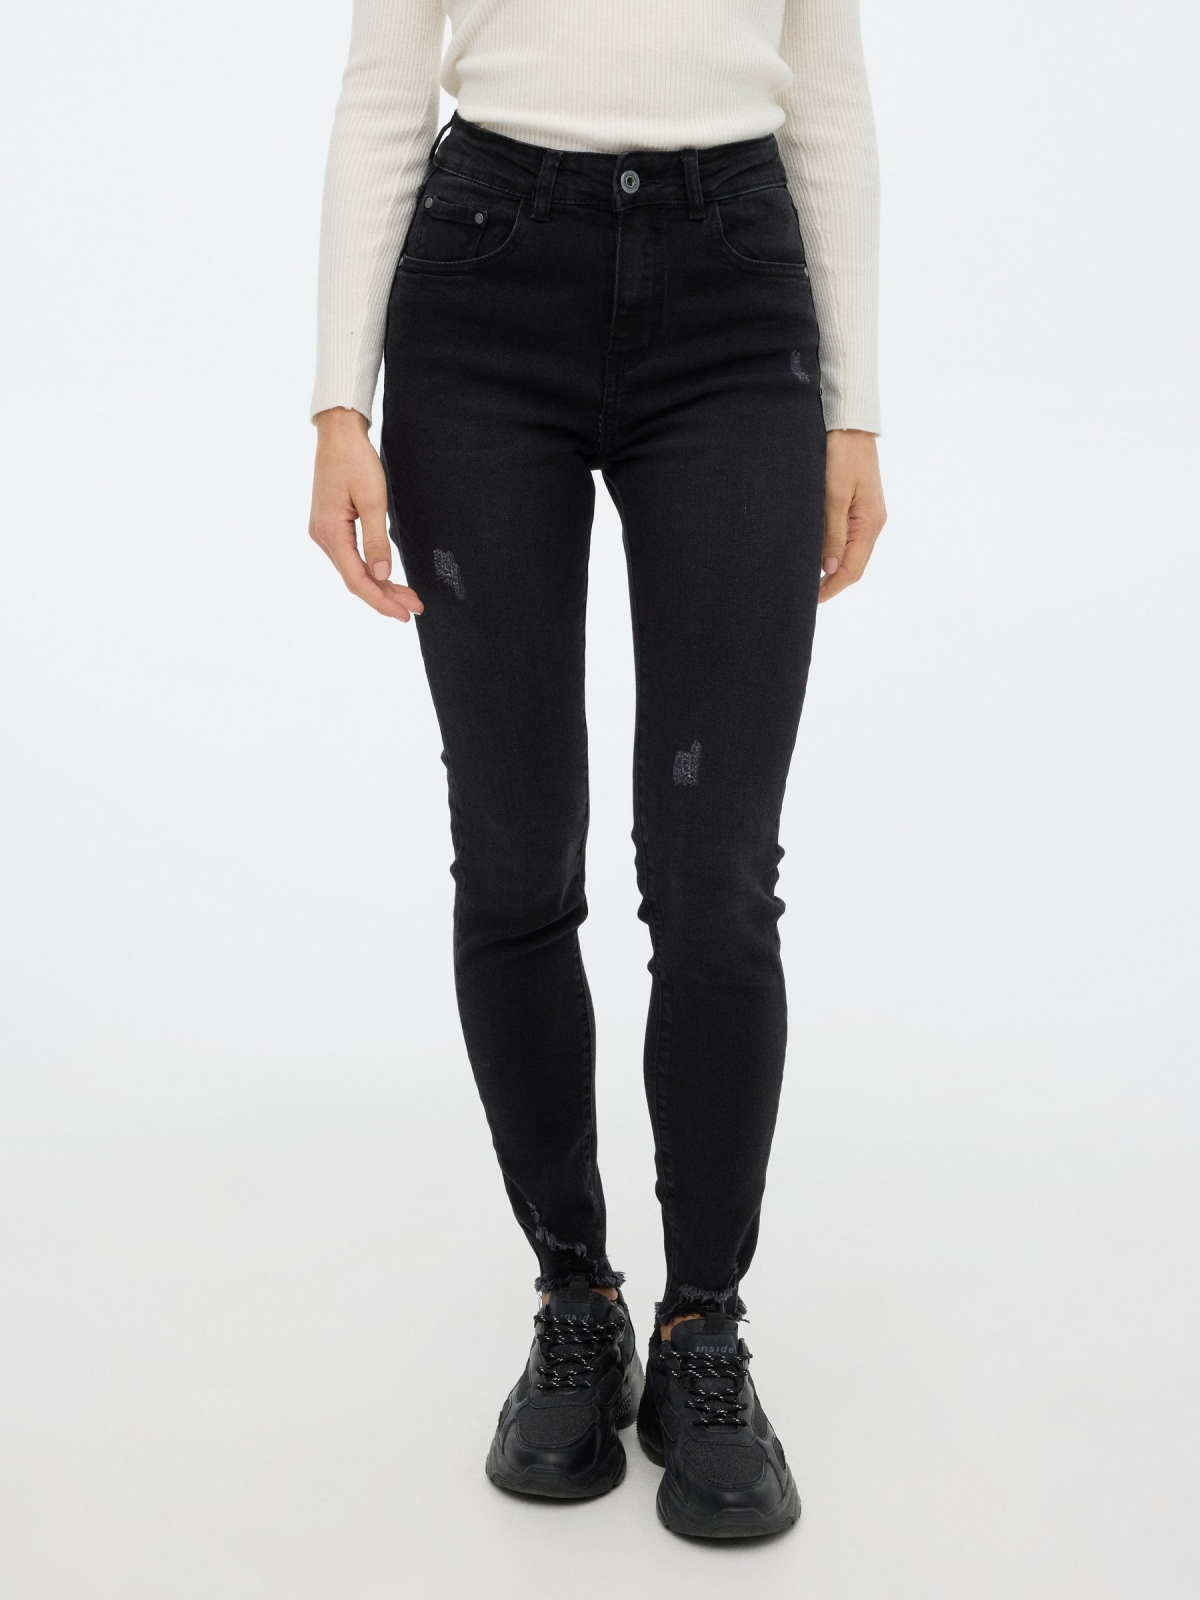 Worn skinny pants black middle front view